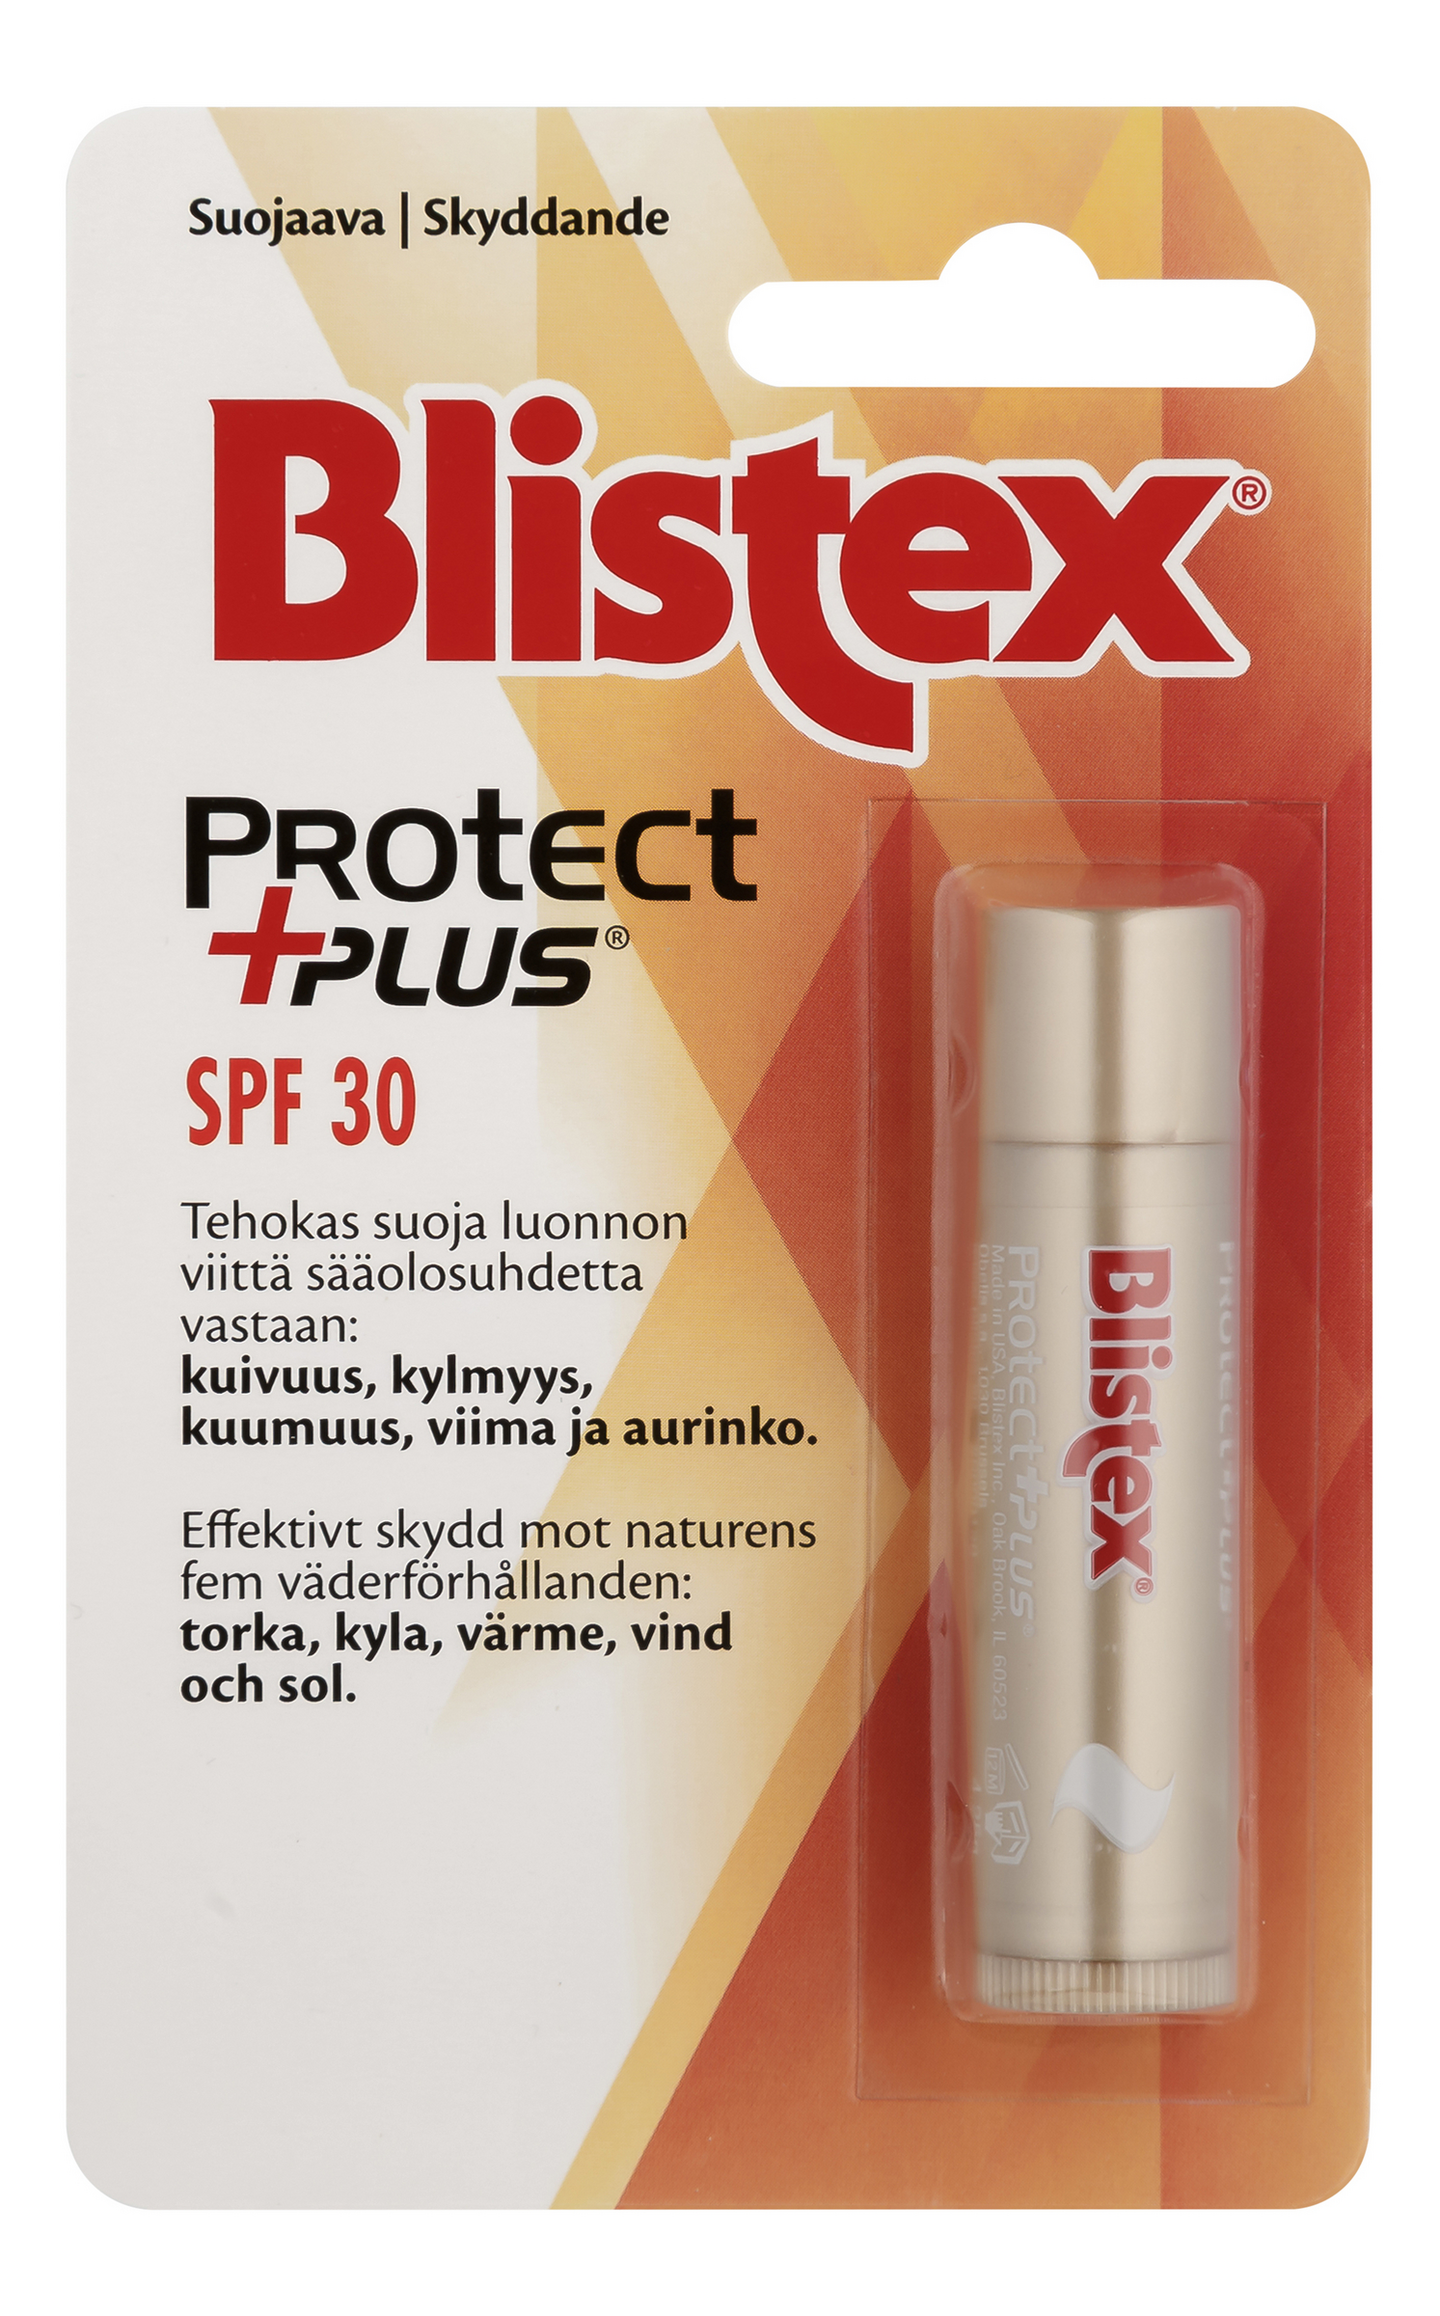 Blistex 4,25g ProtectPlus huulivoide